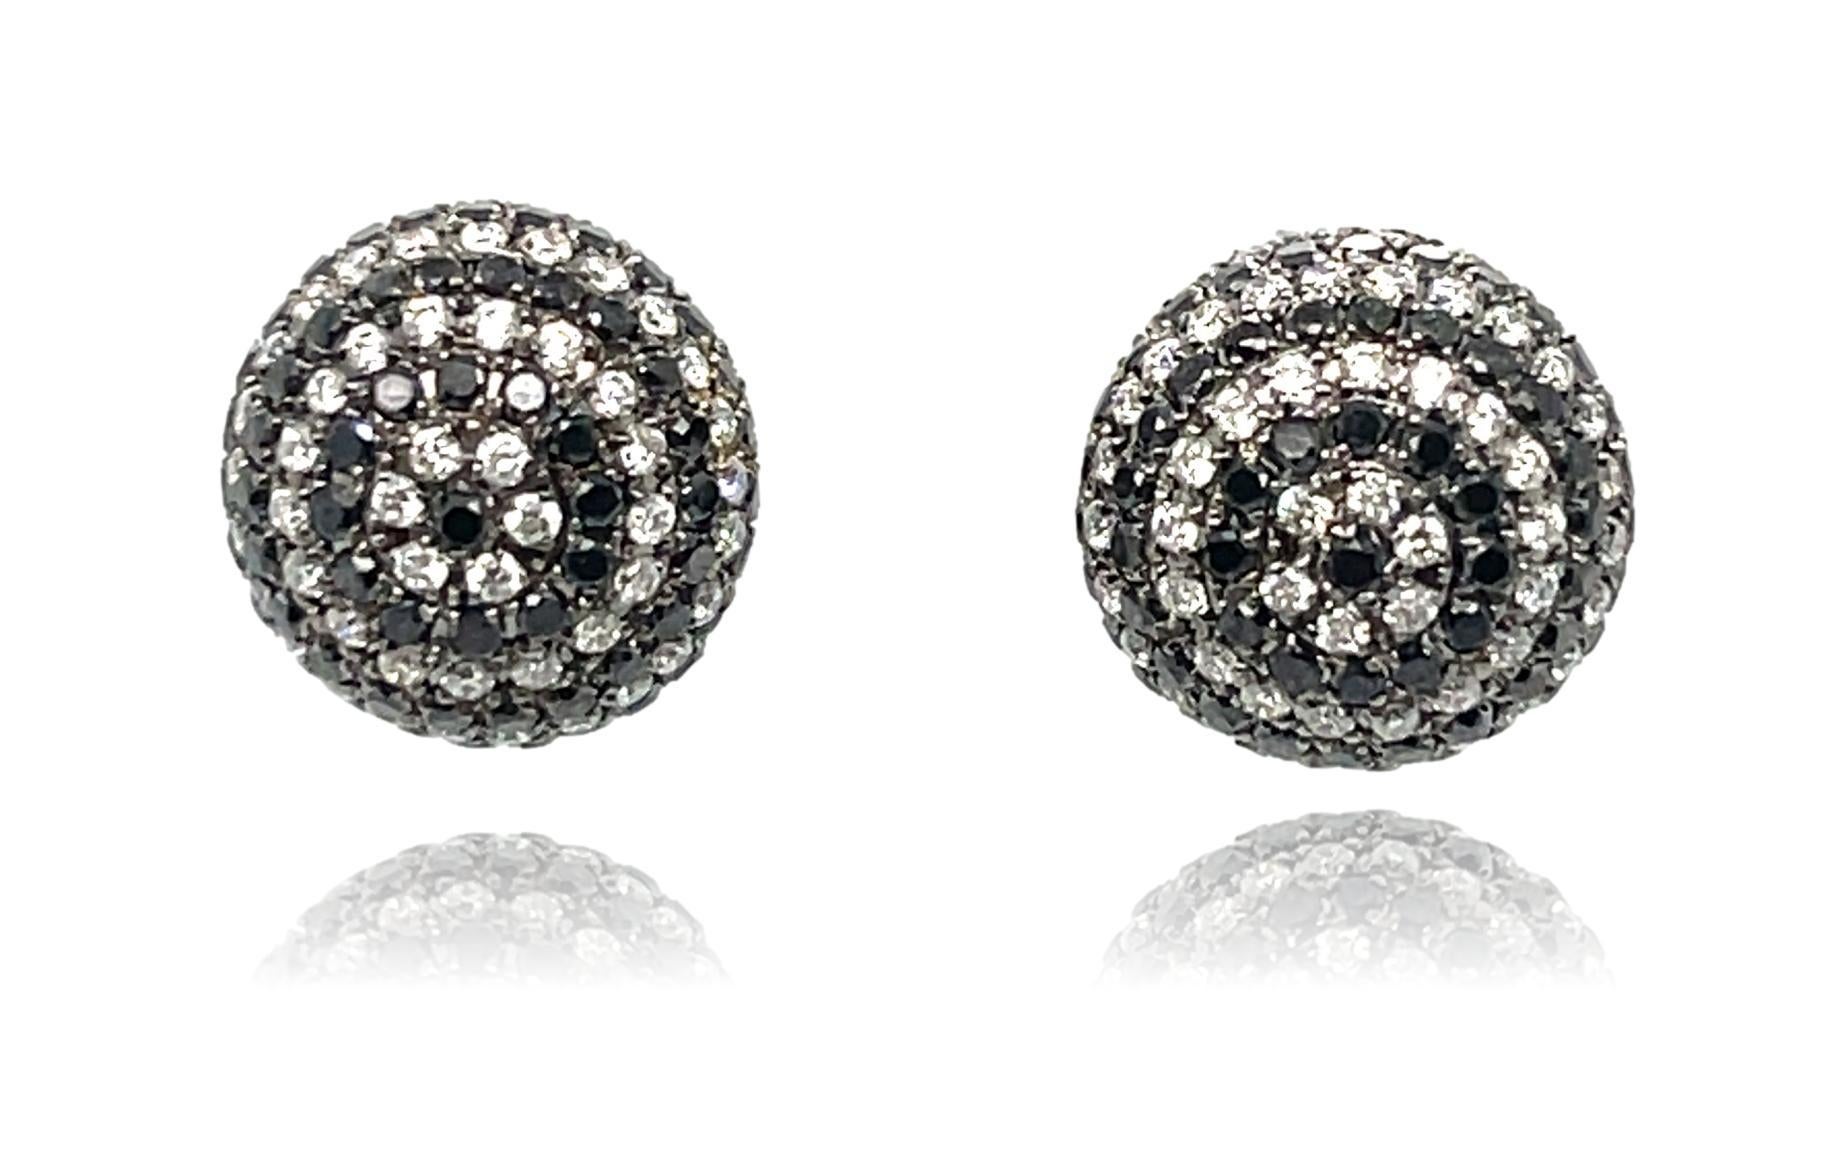 These stunning globe stud earrings are surrounded with natural black and brilliant cut white diamonds all set in 18K gold. They have double push back closure for extra security and snug fit. These earrings come in a beautiful box ready for the